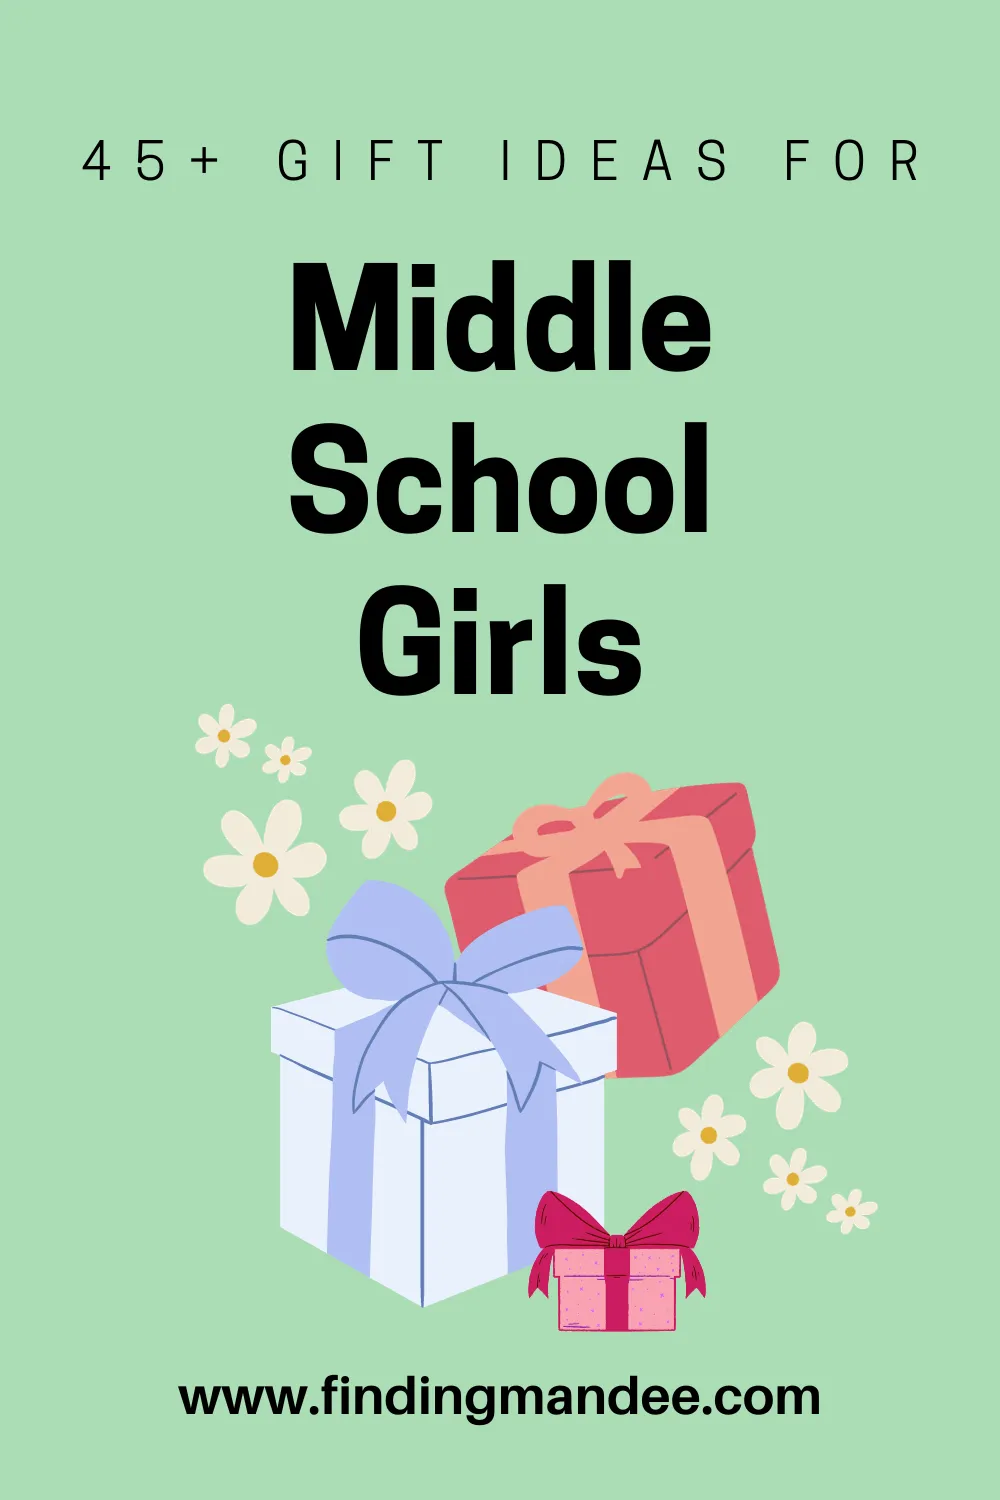 45+ Gift Ideas for Middle School Girls | Finding Mandee